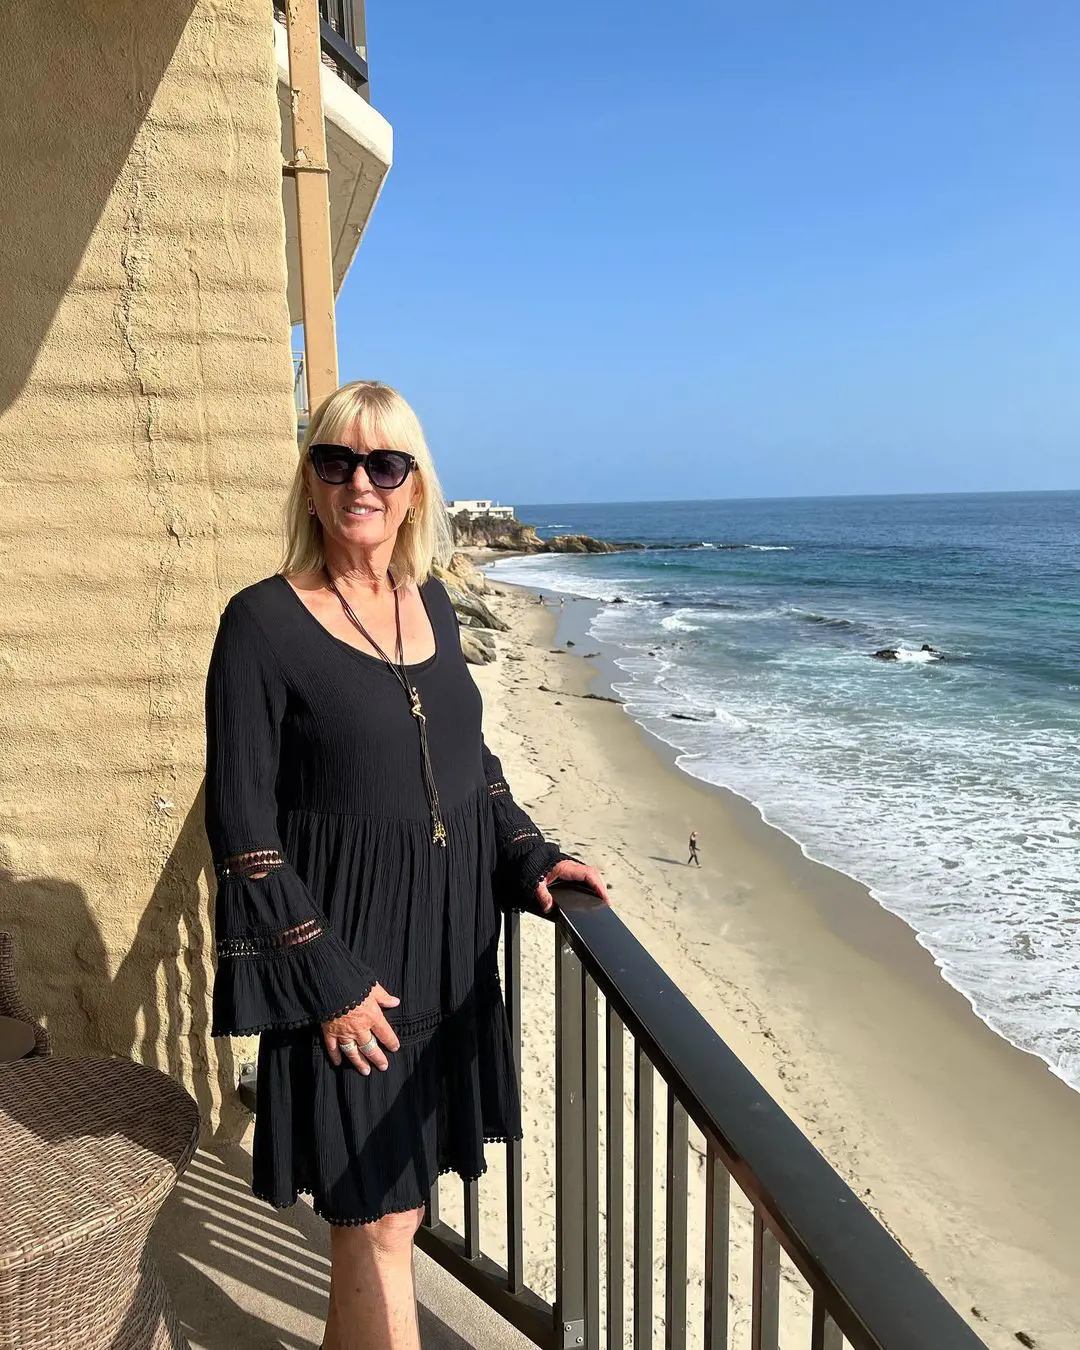 Dominique's hubby Robert surprised her with a getaway at Laguna Beach's Surf and Sand hotel, and she got a new pair of fancy sunglasses 